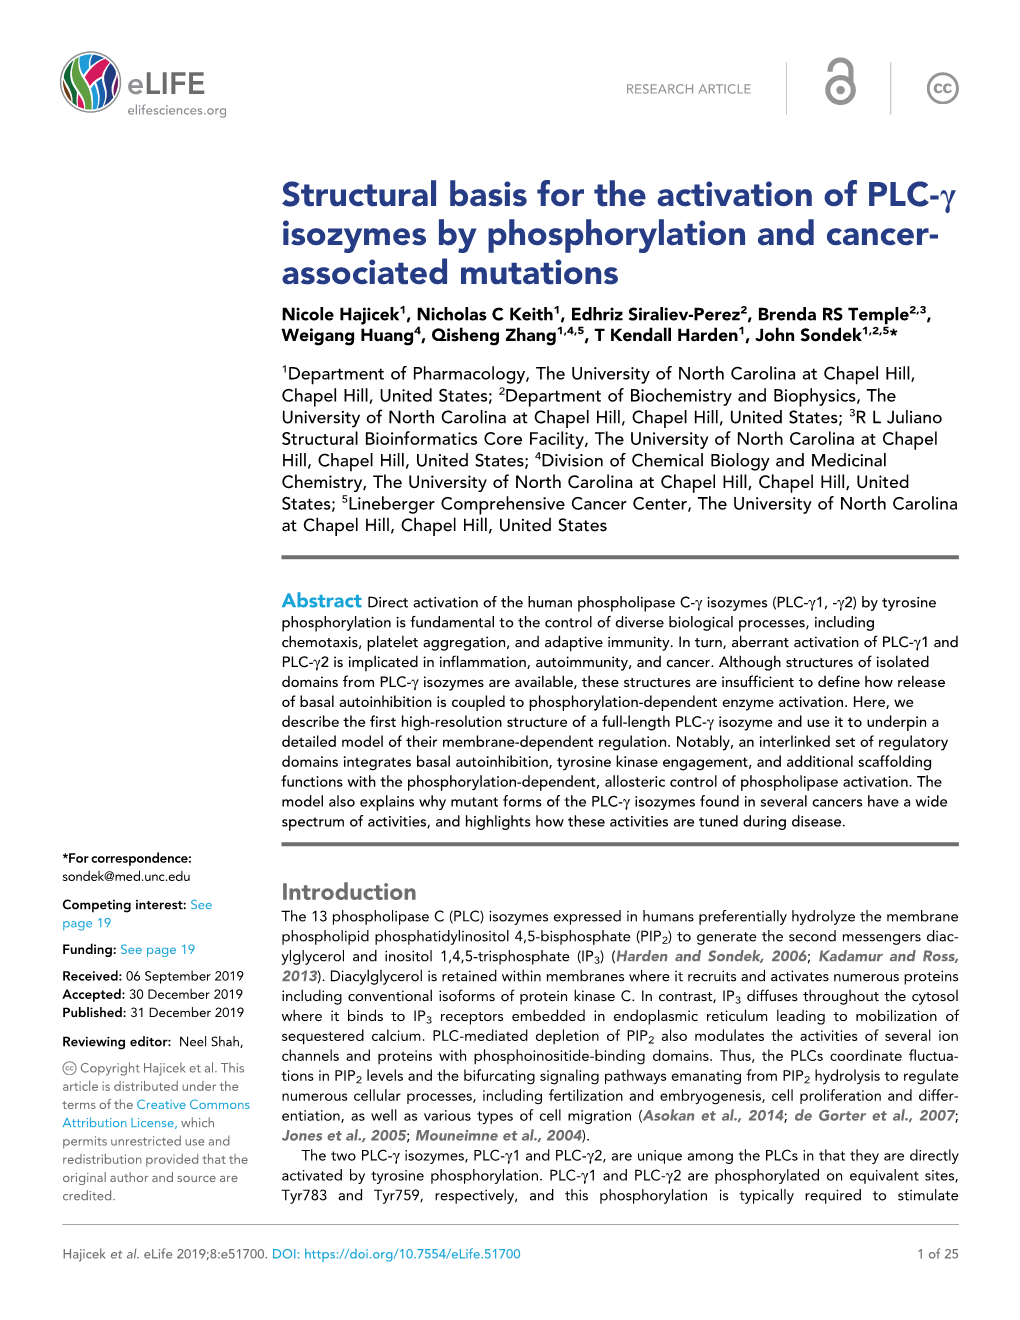 Structural Basis for the Activation of PLC-G Isozymes